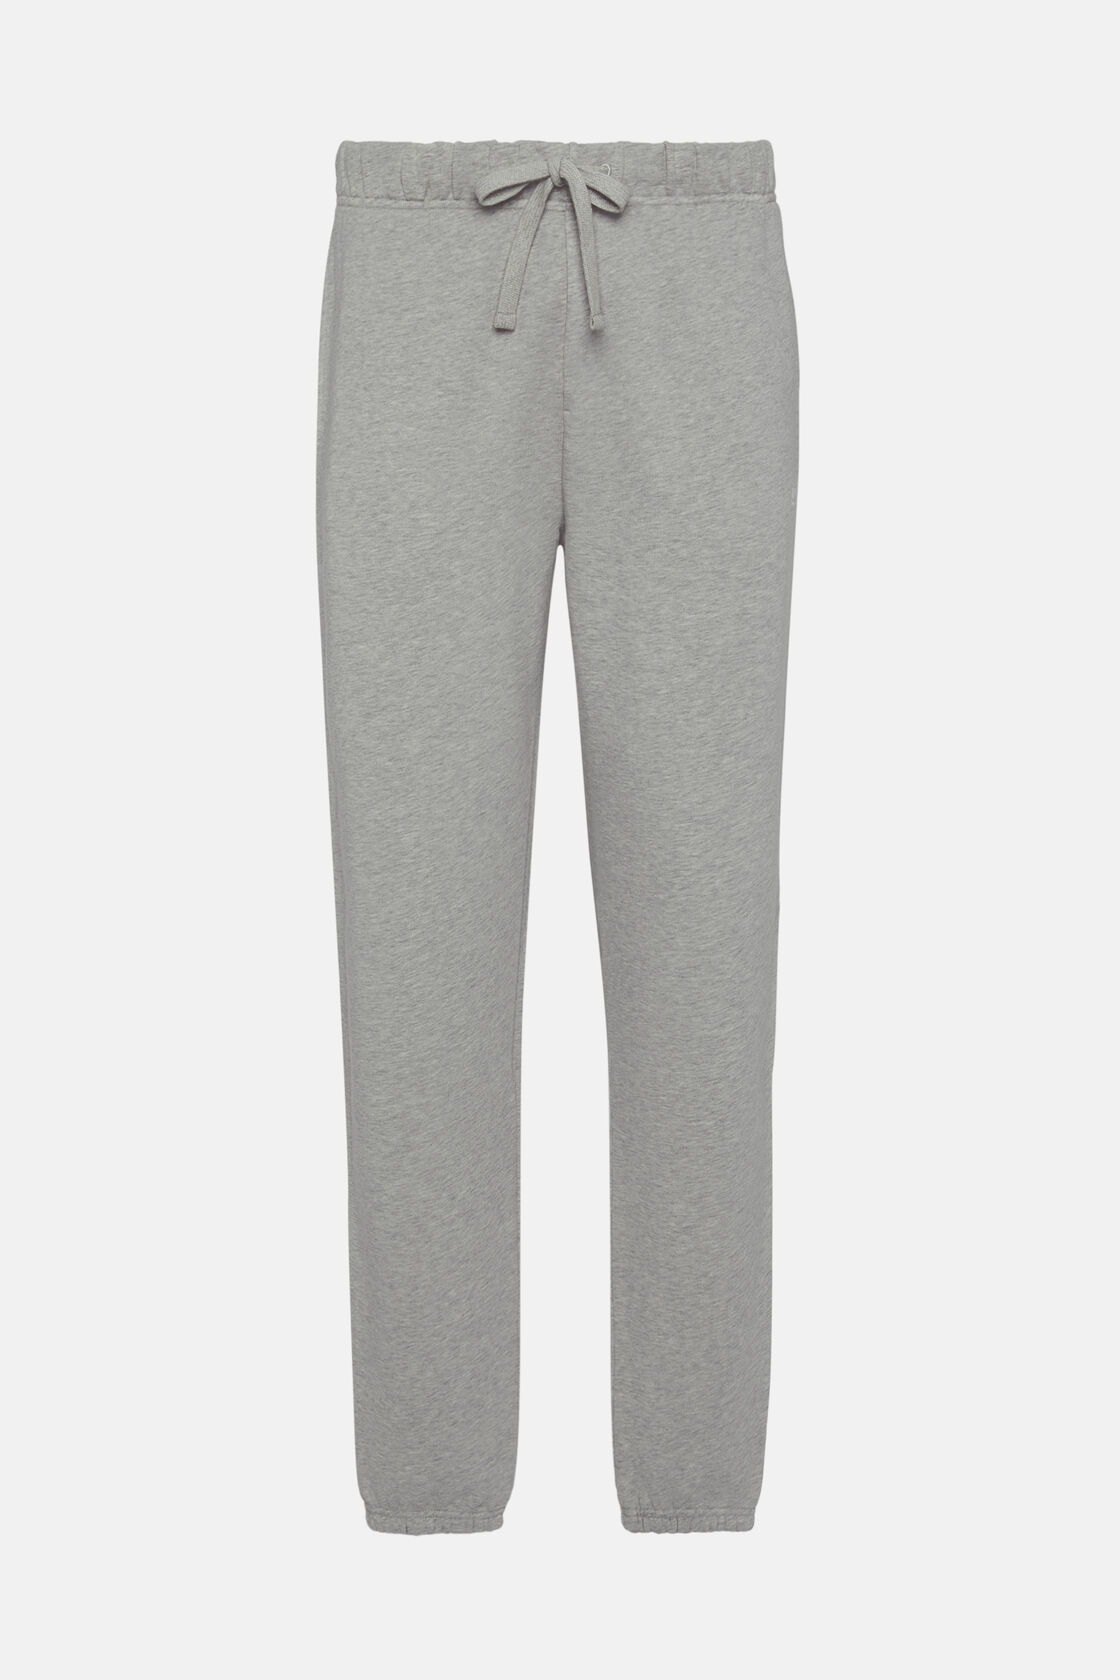 Stretch Mixed Cotton Trousers, Grey, hi-res